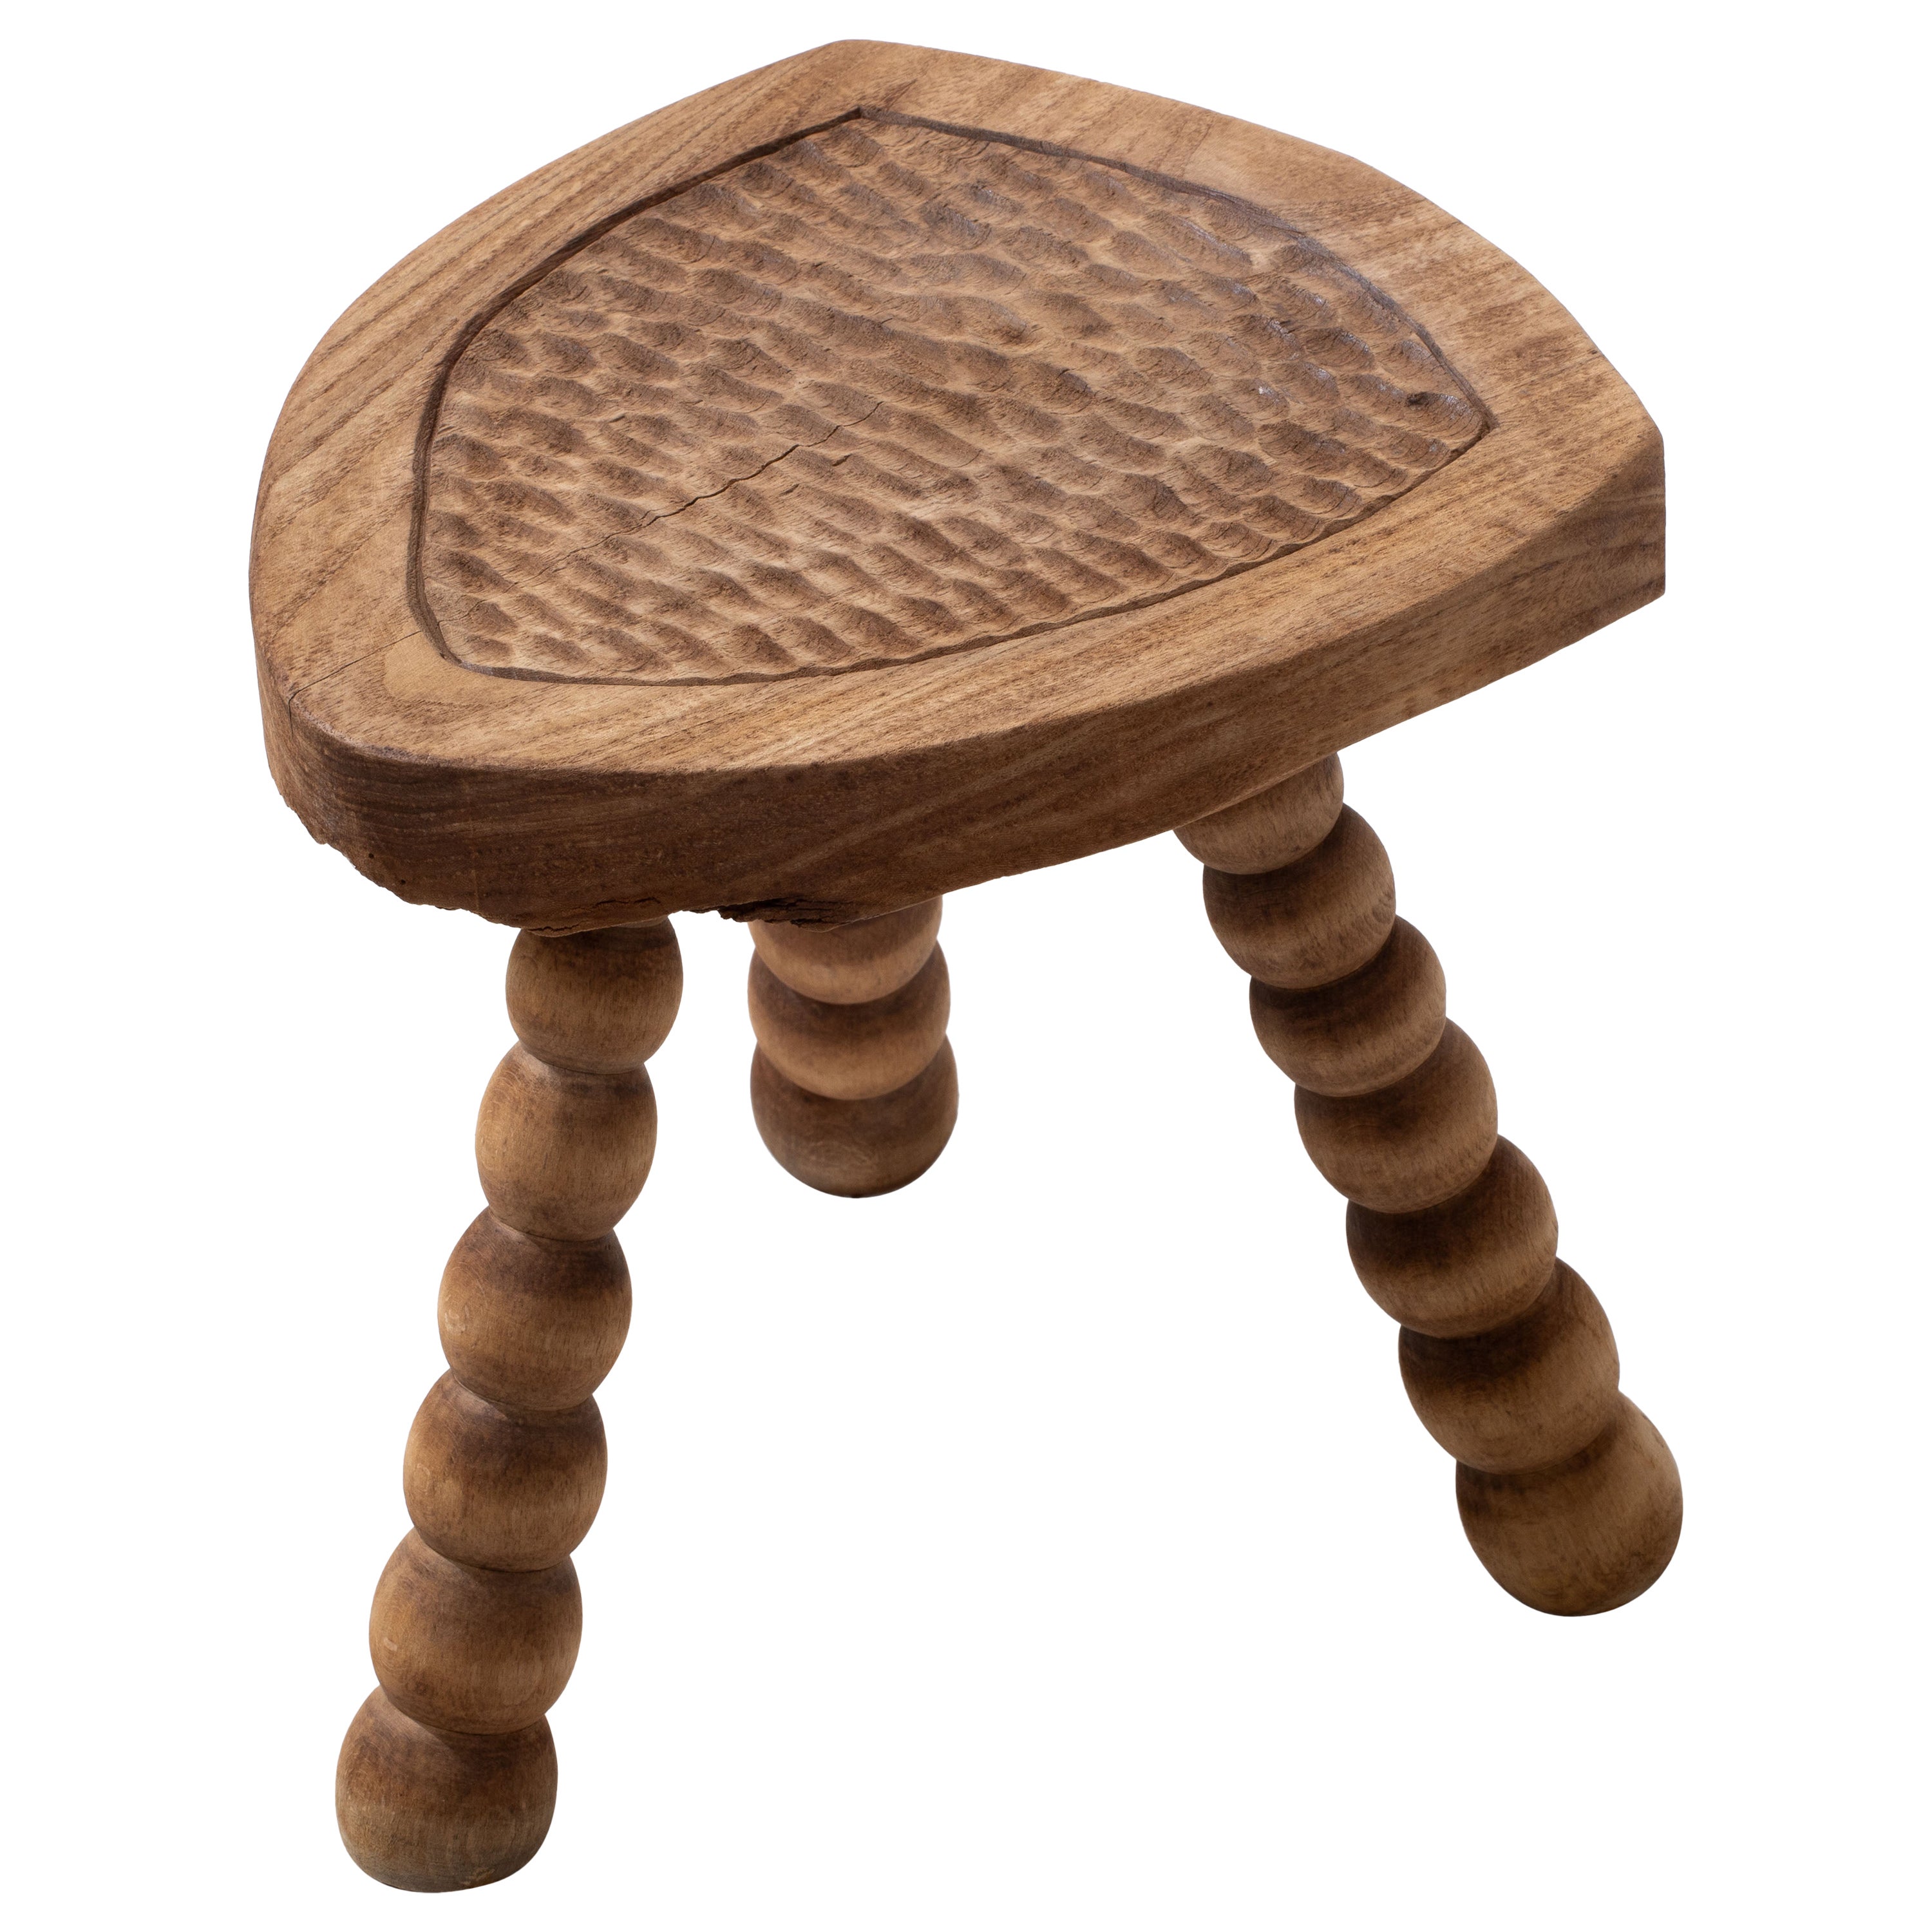 Authentic French Brutalist Stool: A Triumph of Craftsmanship and Design For Sale